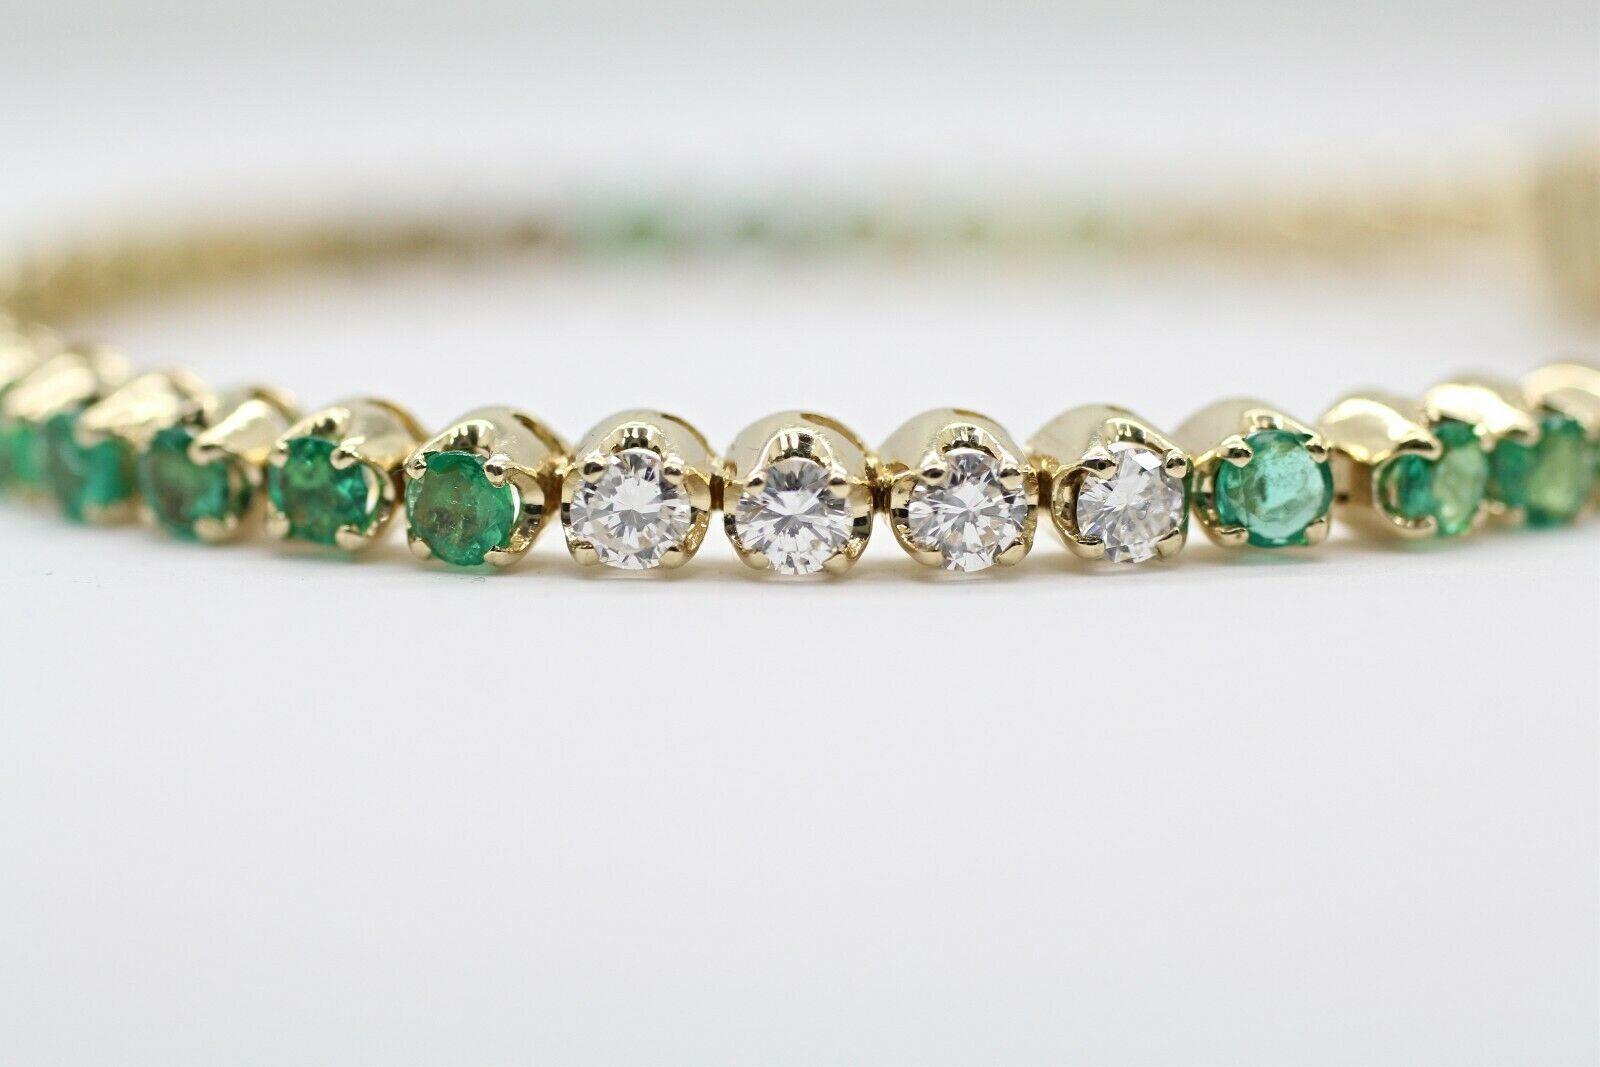  This is very beautiful 14k yellow gold custom made bracelet with very clean emeralds and round diamonds. This bracelet has 45 pieces of stones in approximately 4.00 carat total weight, H color and VS1 in clarity..
Specifications:
    main stone: